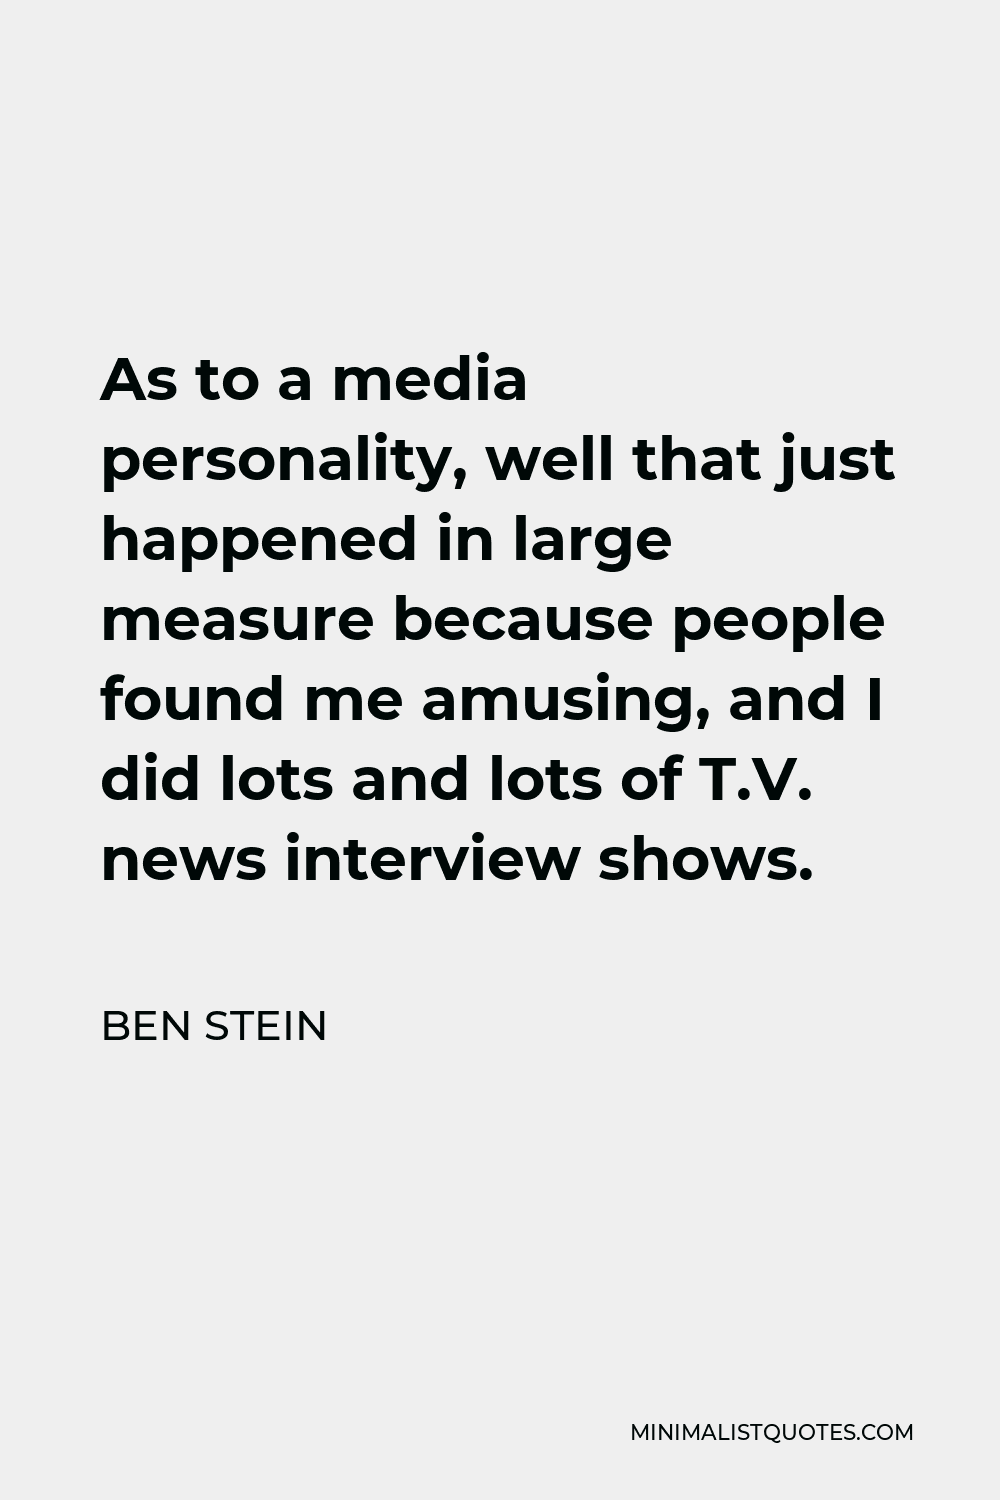 Ben Stein Quote - As to a media personality, well that just happened in large measure because people found me amusing, and I did lots and lots of T.V. news interview shows.